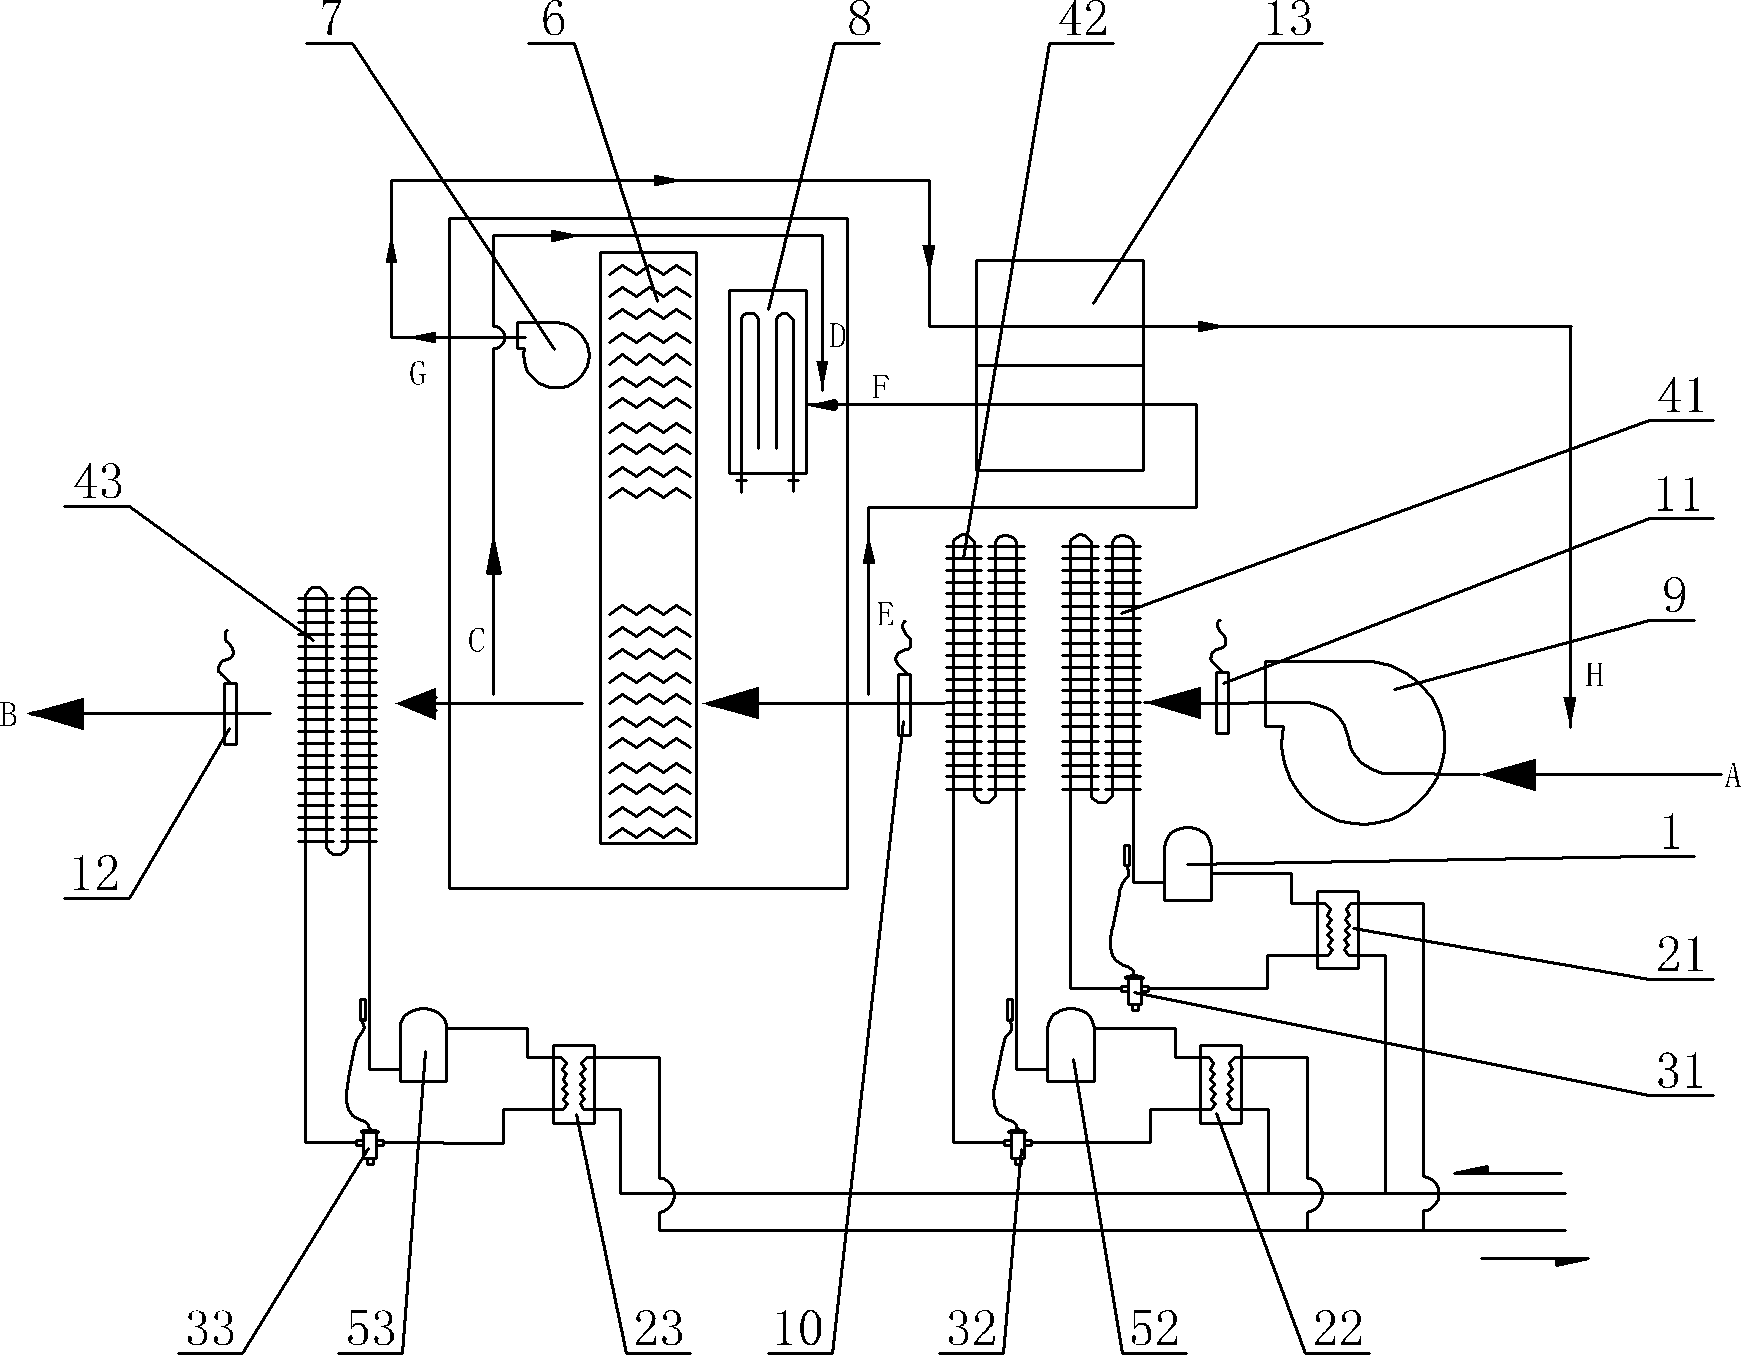 Control method of ultra-low humidity compound dehumidifier